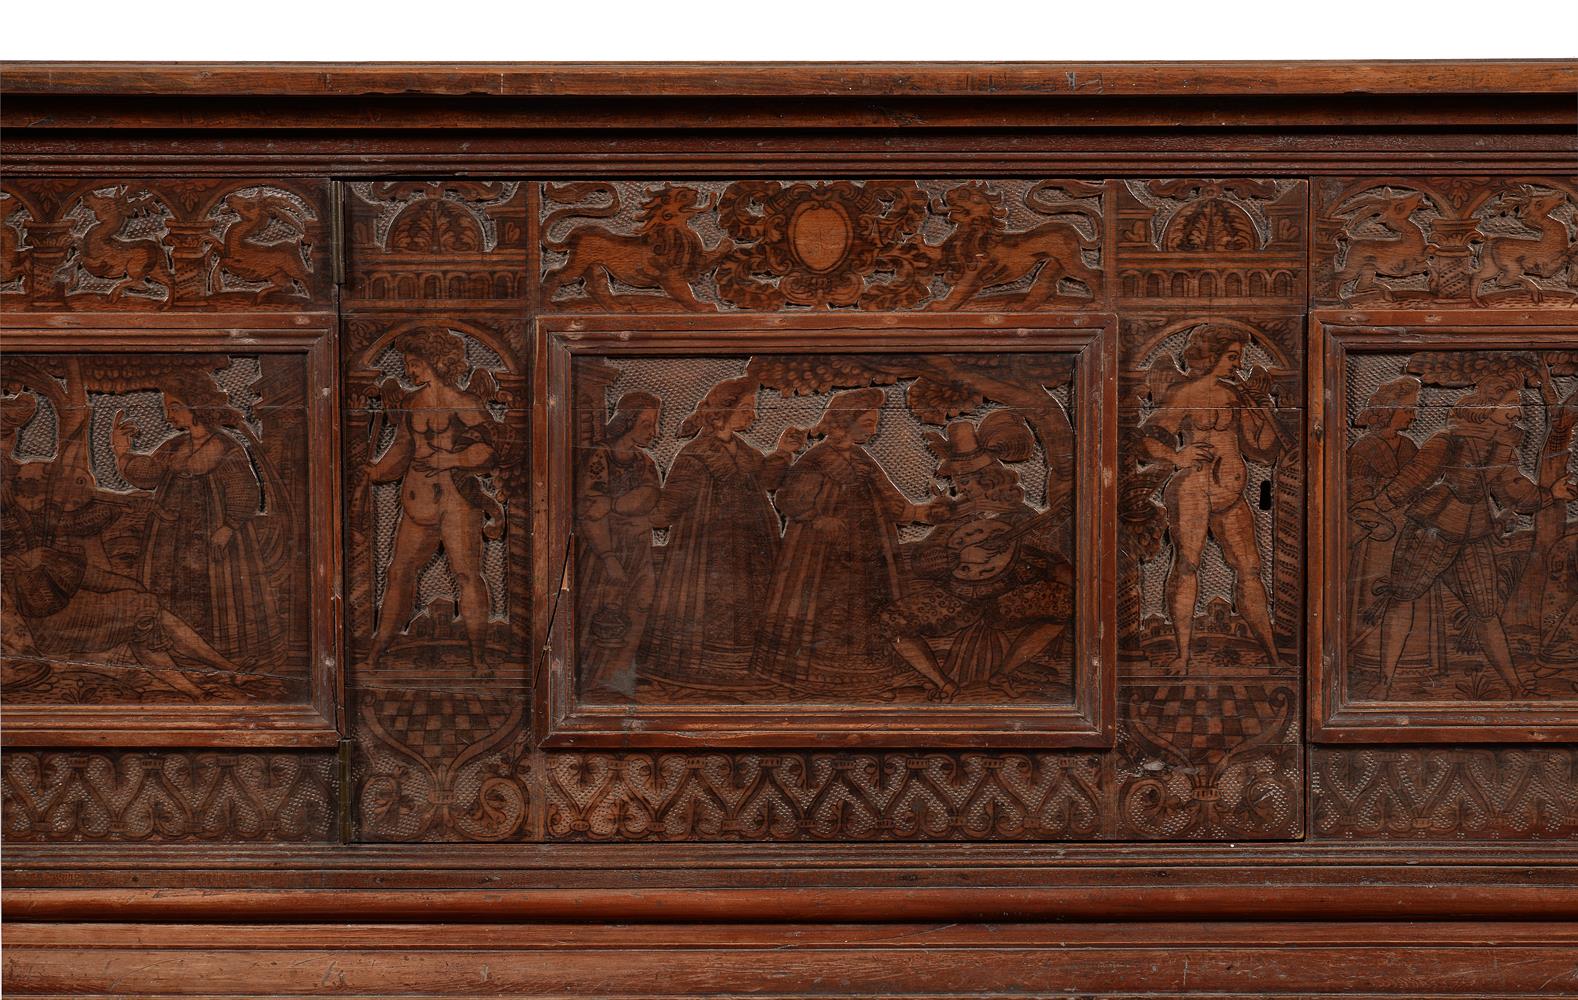 AN ITALIAN CARVED AND POKERWORK DECORATED CHEST OR CASSONE, 16TH CENTURY AND LATER - Image 3 of 12